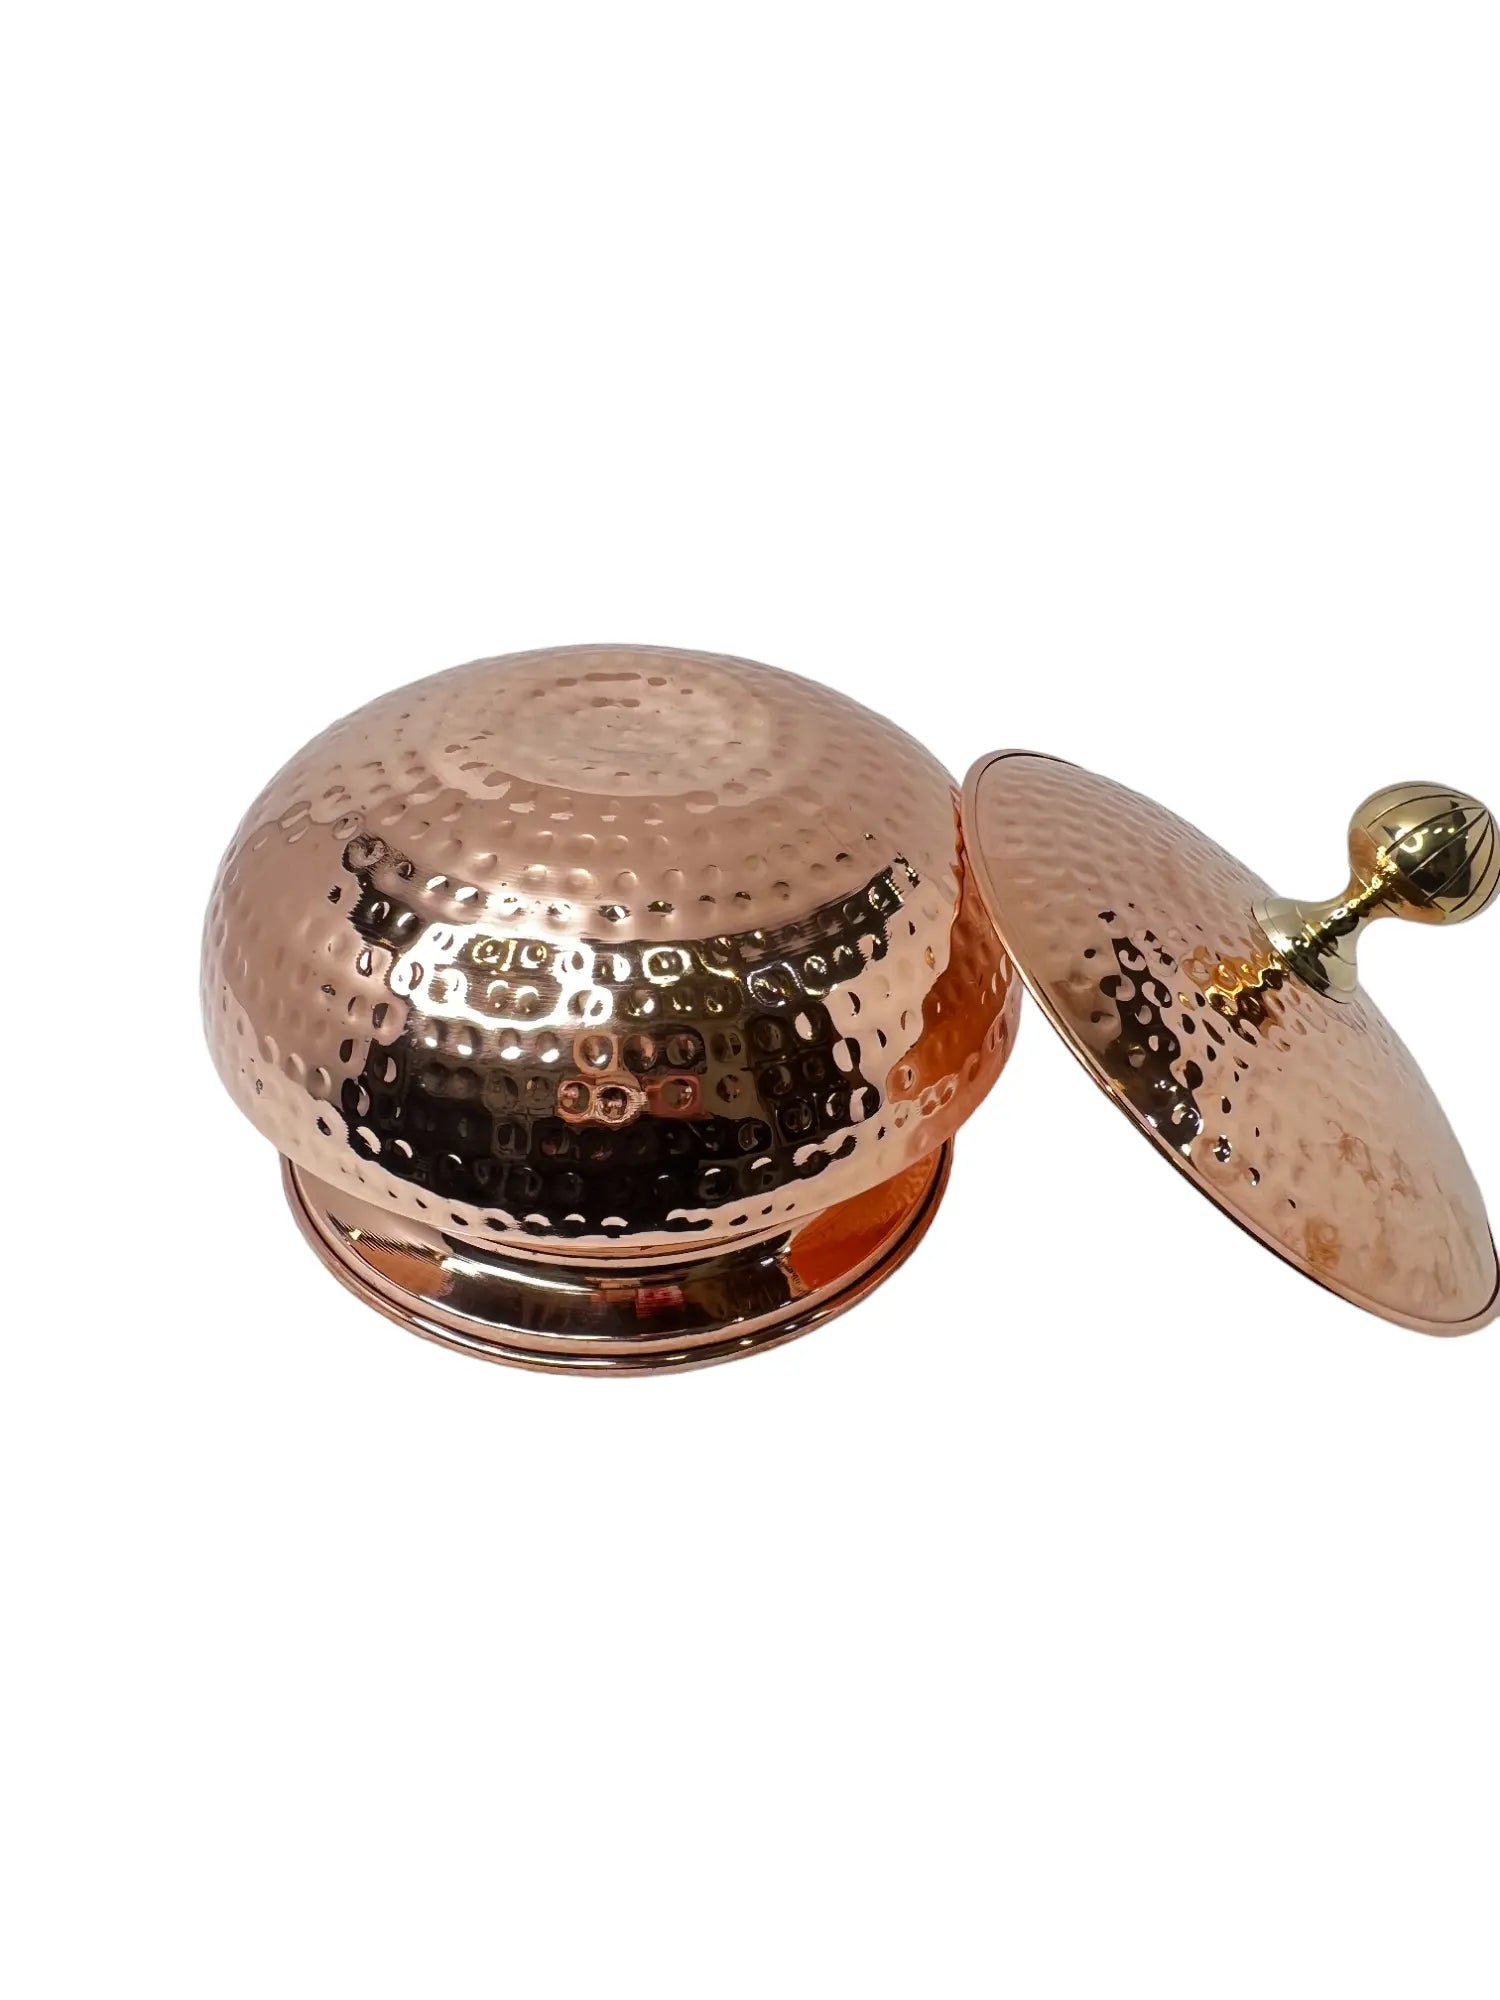 Pure copper patili handi for cooking meat and nahari with kalai inside and hammered finish with lid and premium quality CROCKERY WALA AND COMPANY